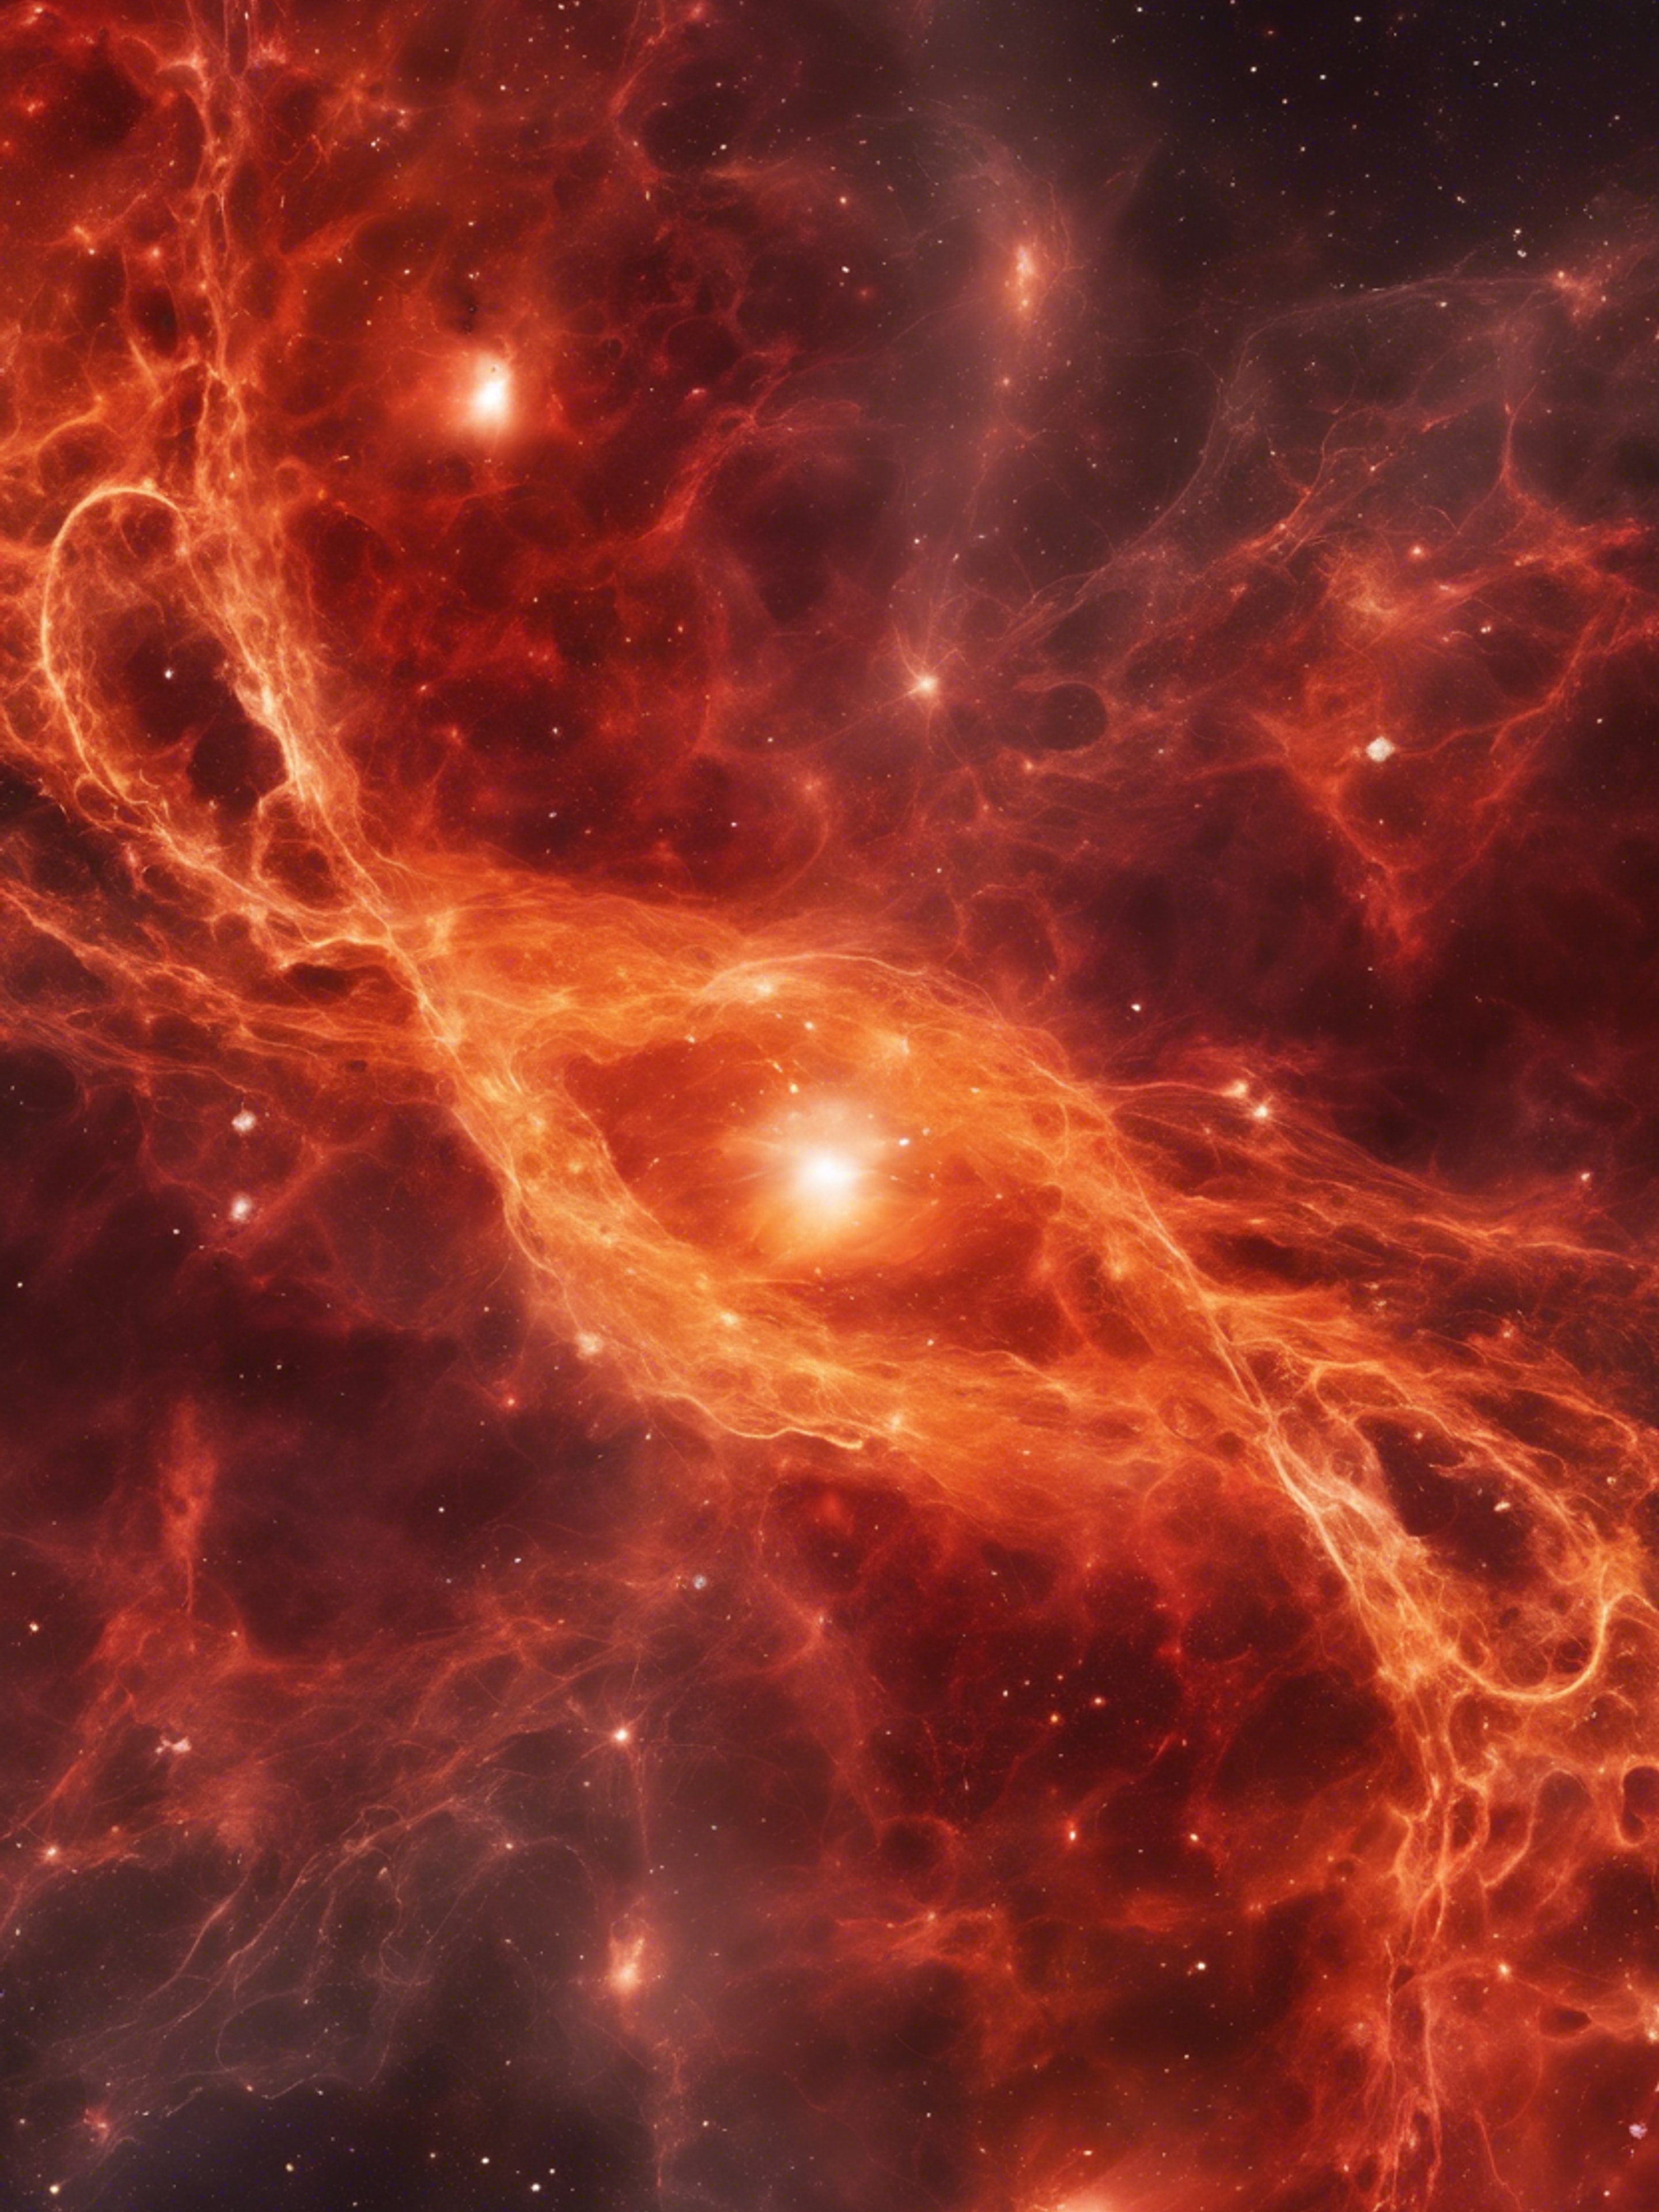 Red and orange nebula moving in chaos to form an alluring abstract pattern, lost in an endless loop. 牆紙[8b81d5815a2d445c9bb4]